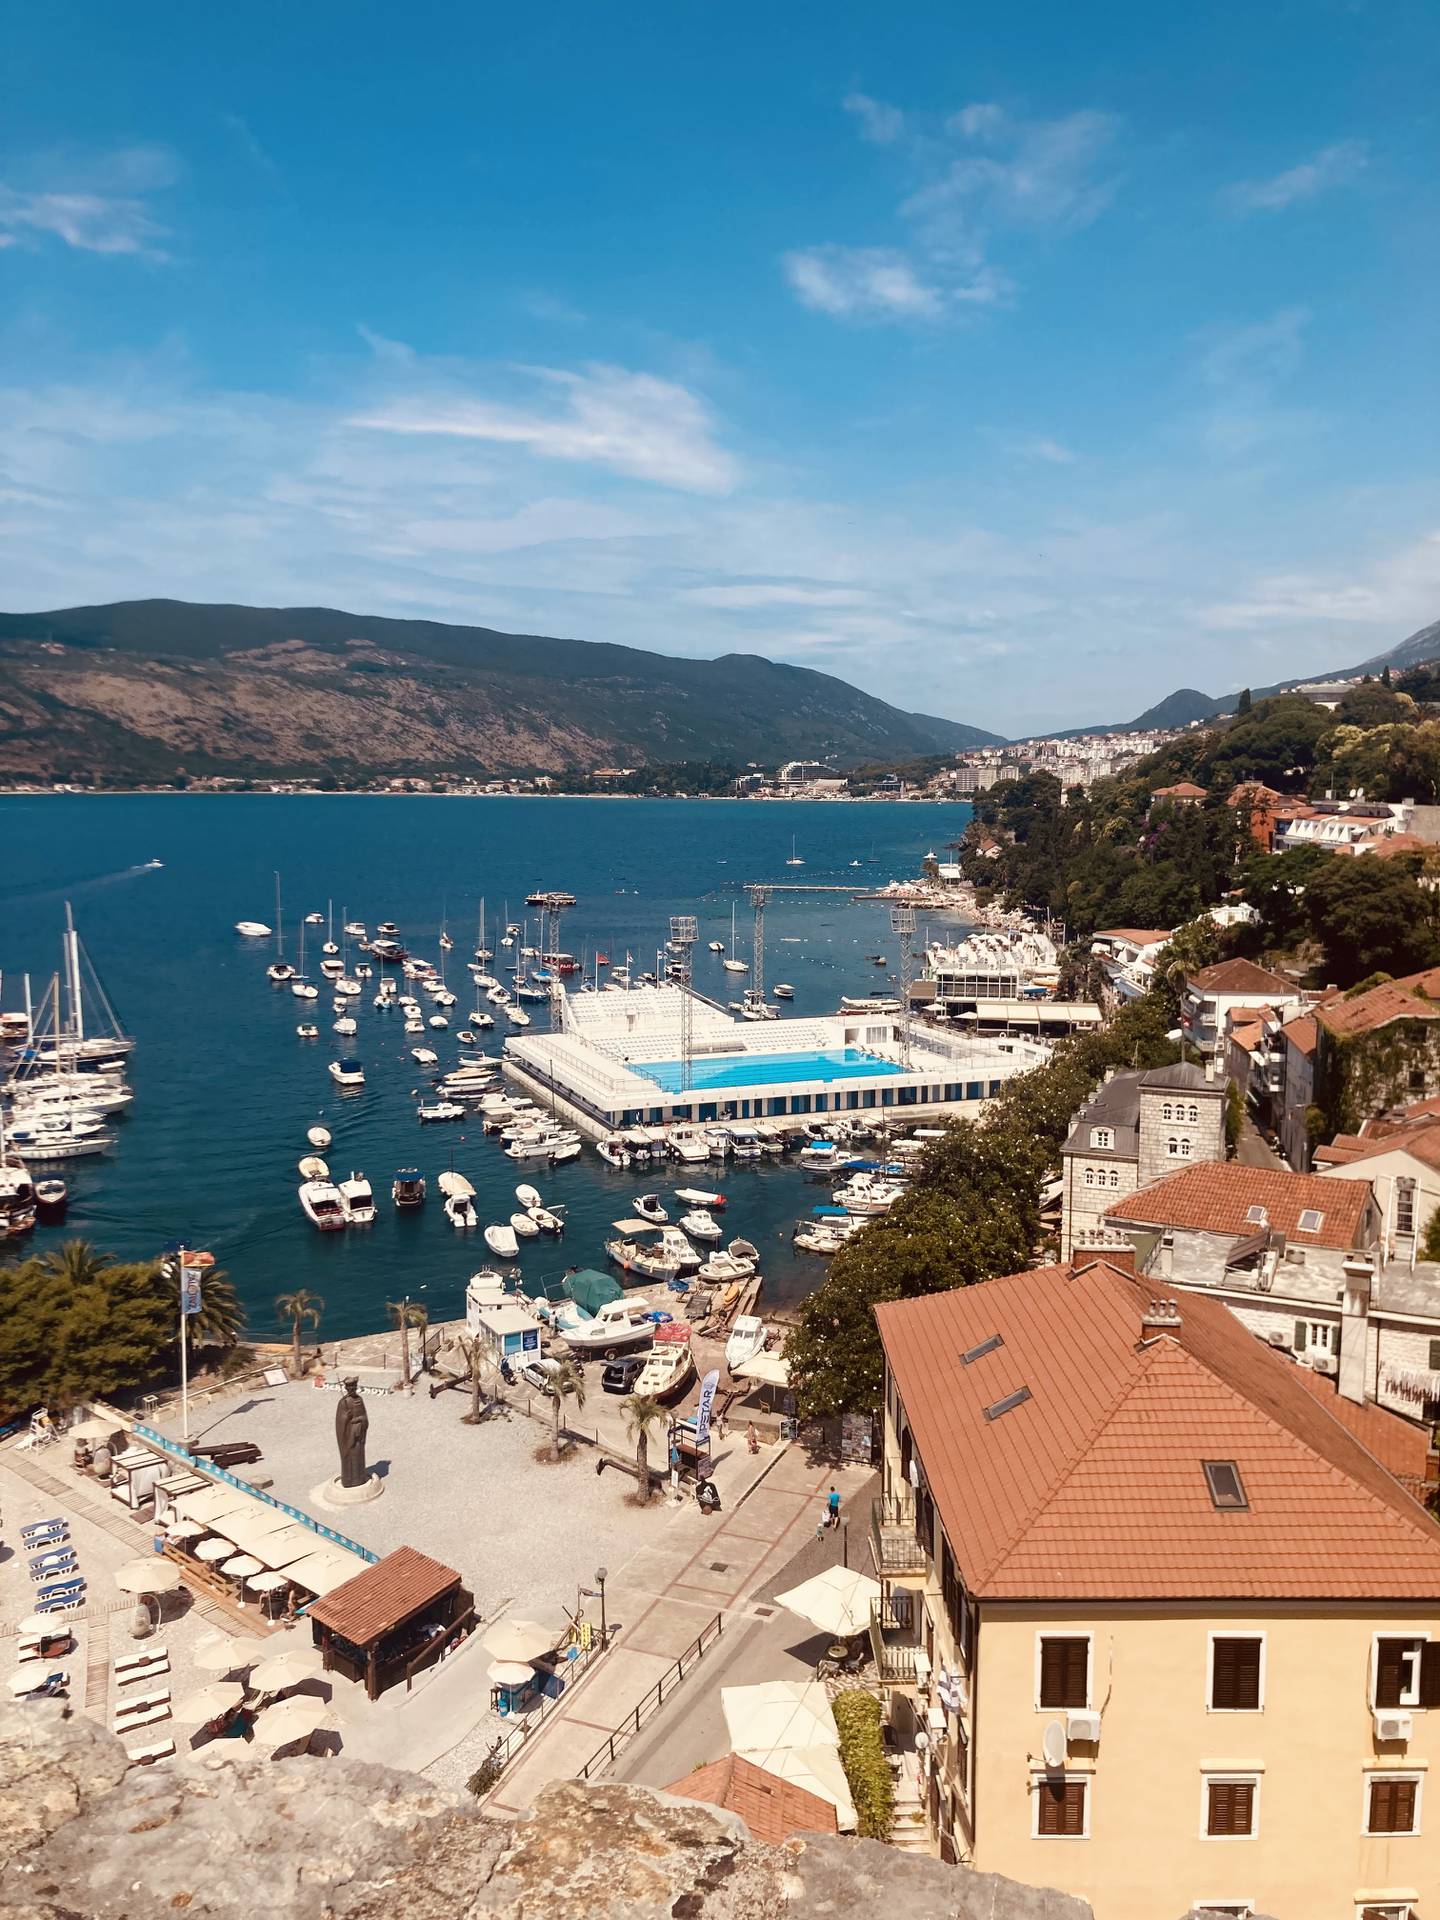 Herceg Novi, the city is deemed Montenegro's sunniest with over 200 days of sunshine per year